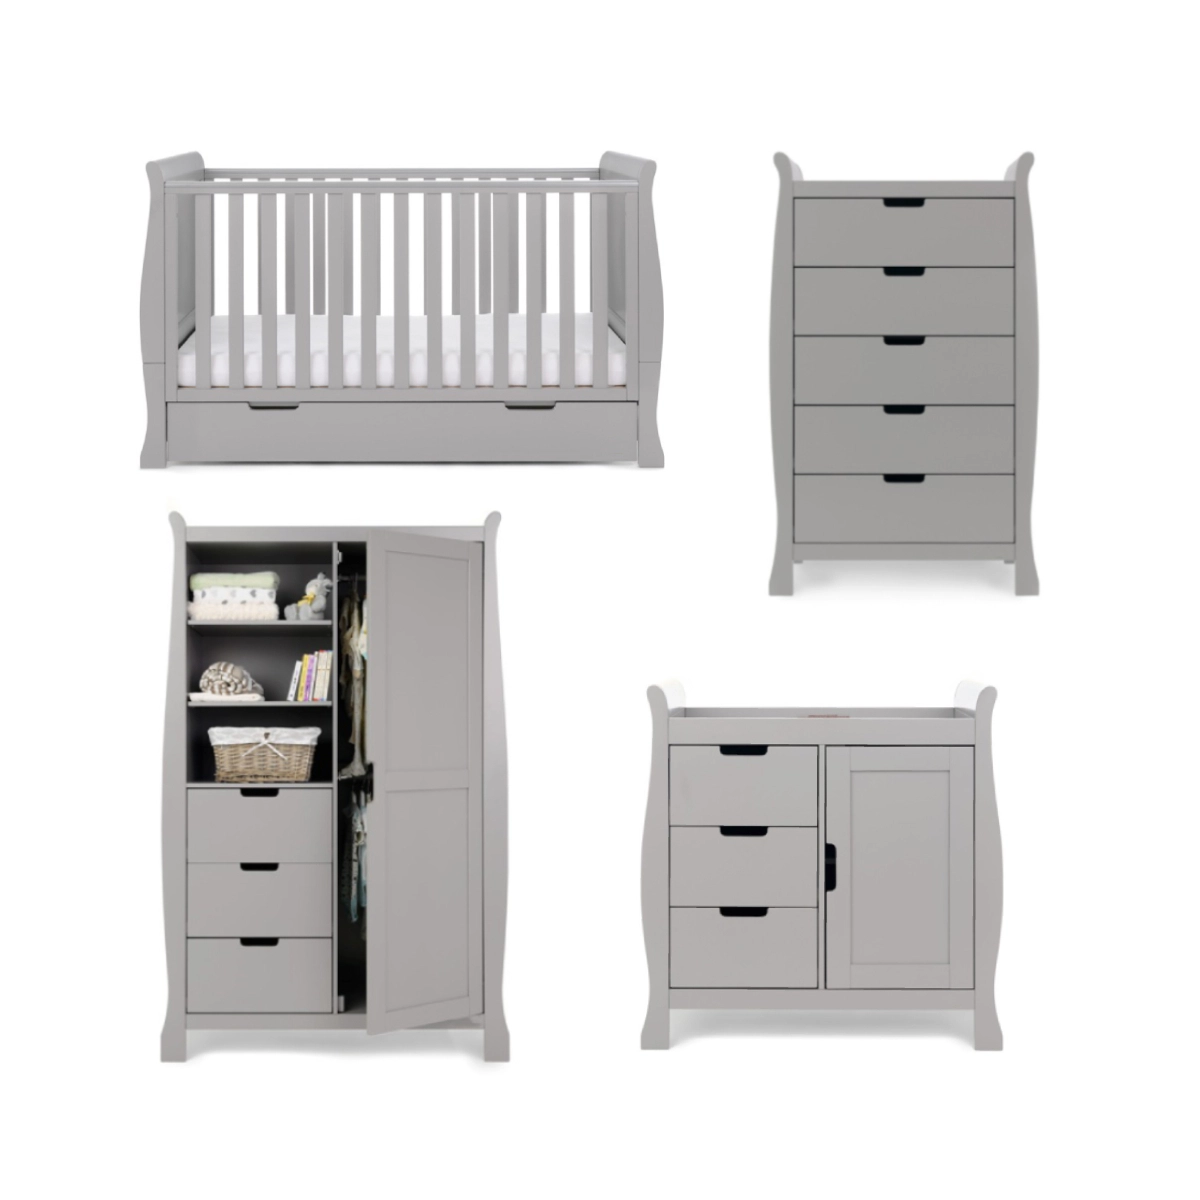 Image of Obaby Stamford Classic Sleigh 4 Piece Furniture Roomset-Warm Grey